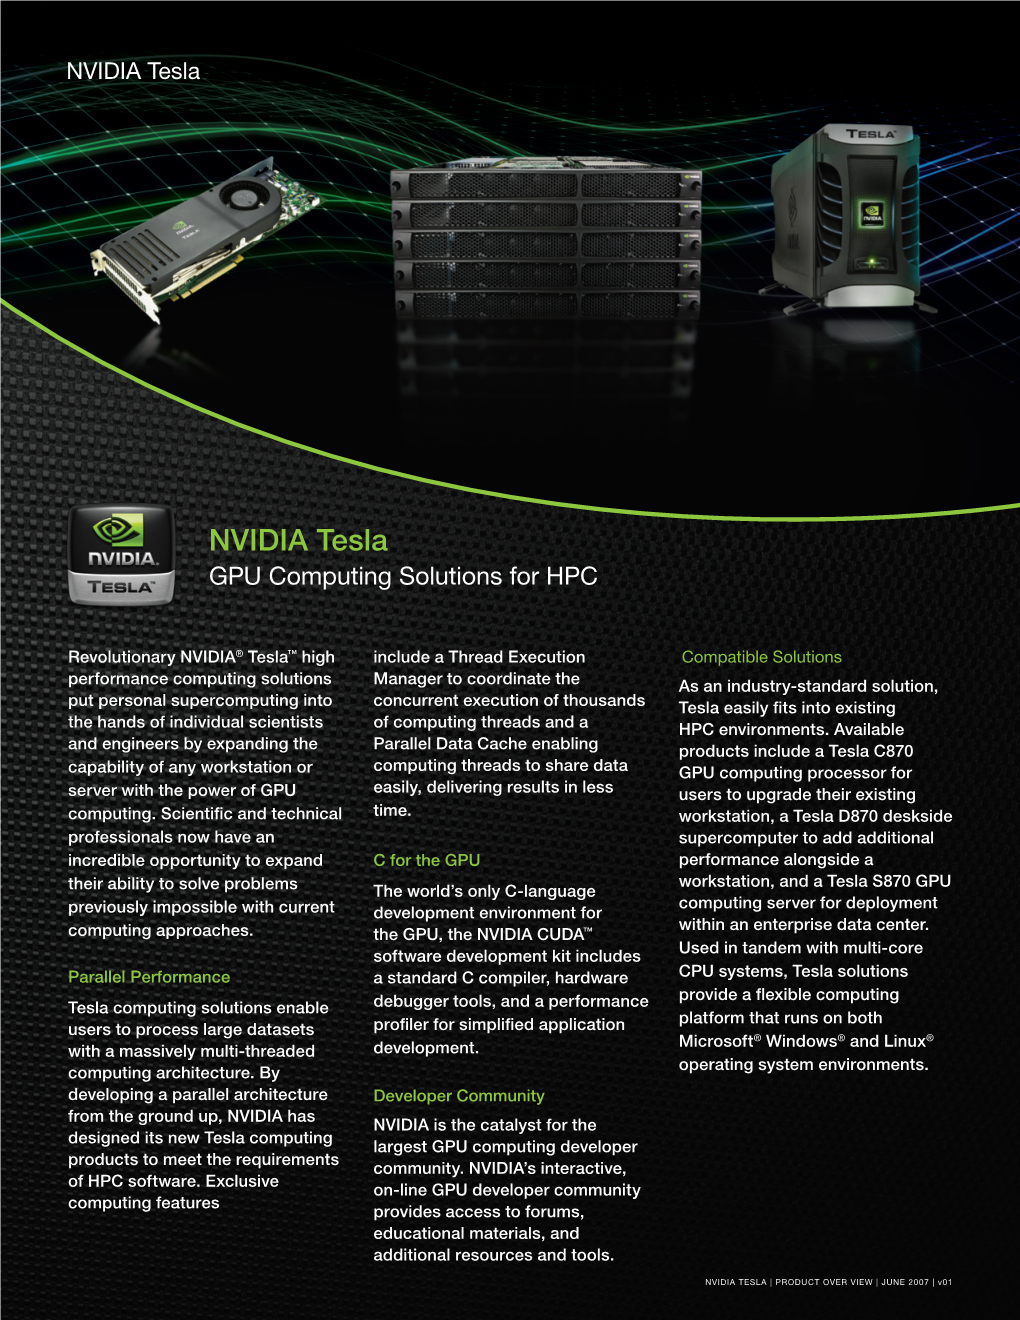 Nvidia Tesla Product Overview